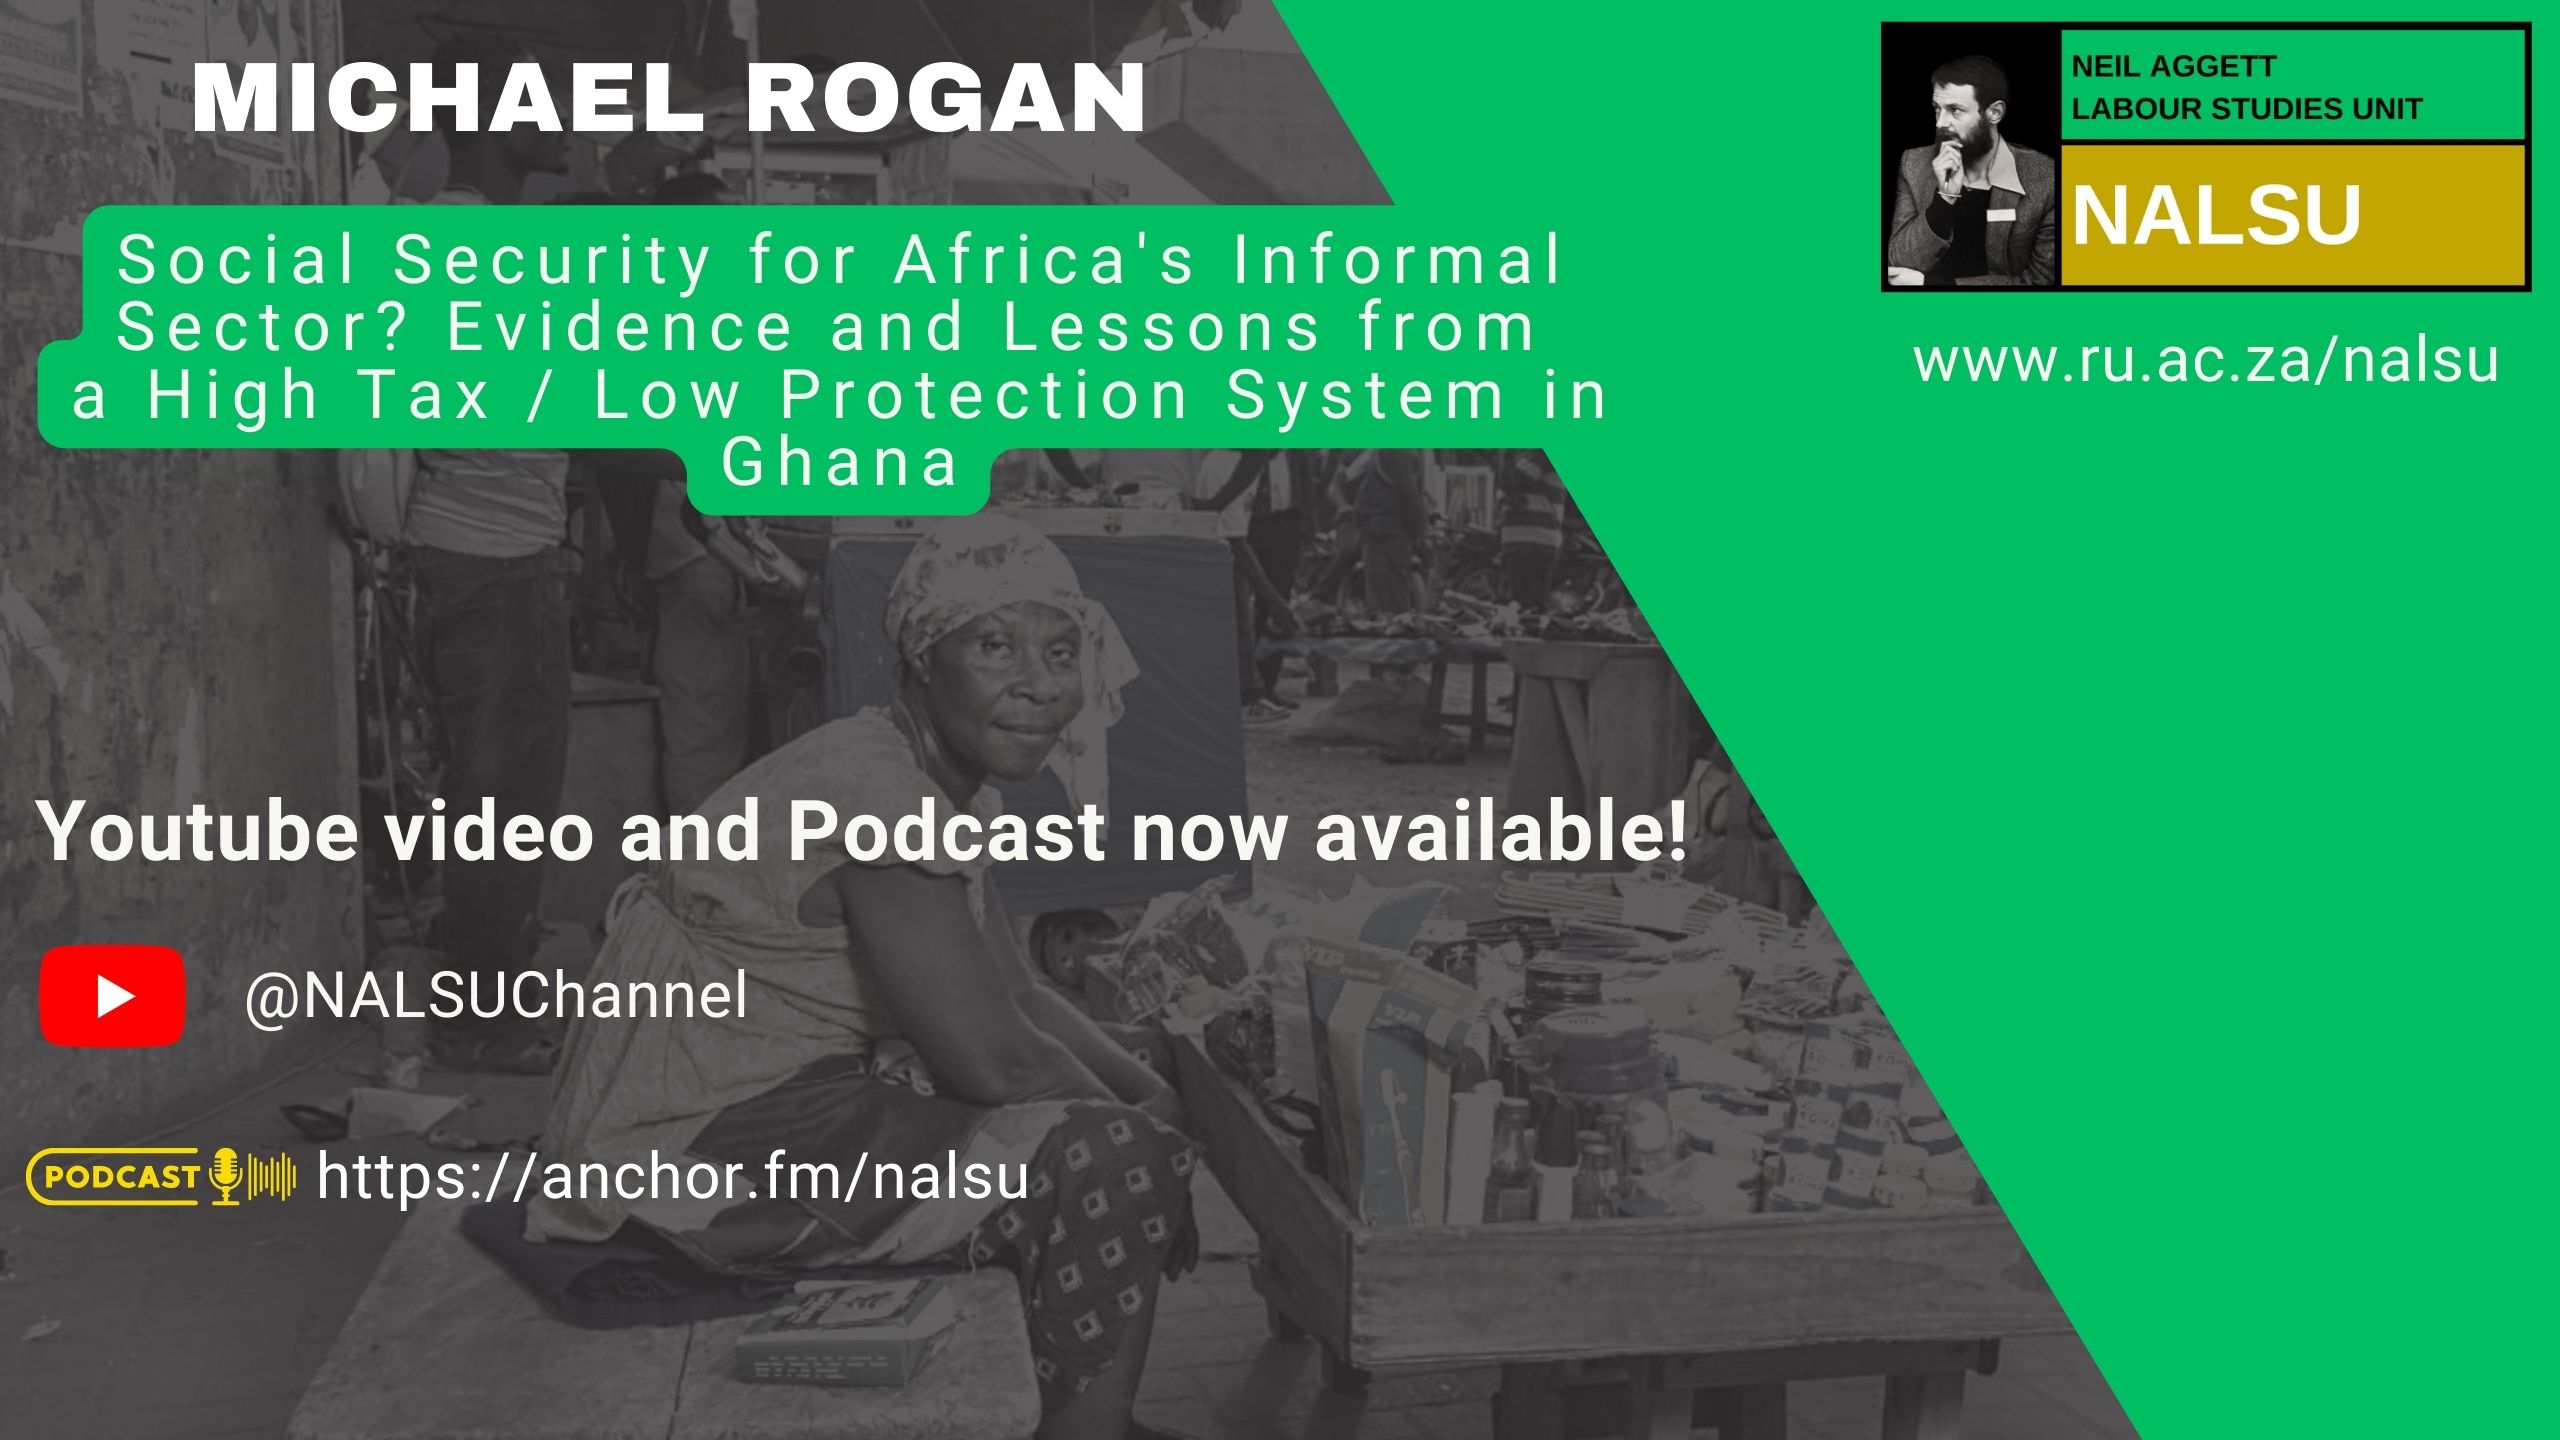  “Social Security for Africa's Informal Sector? Evidence and Lessons from a High Tax / Low Protection System in Ghana"
